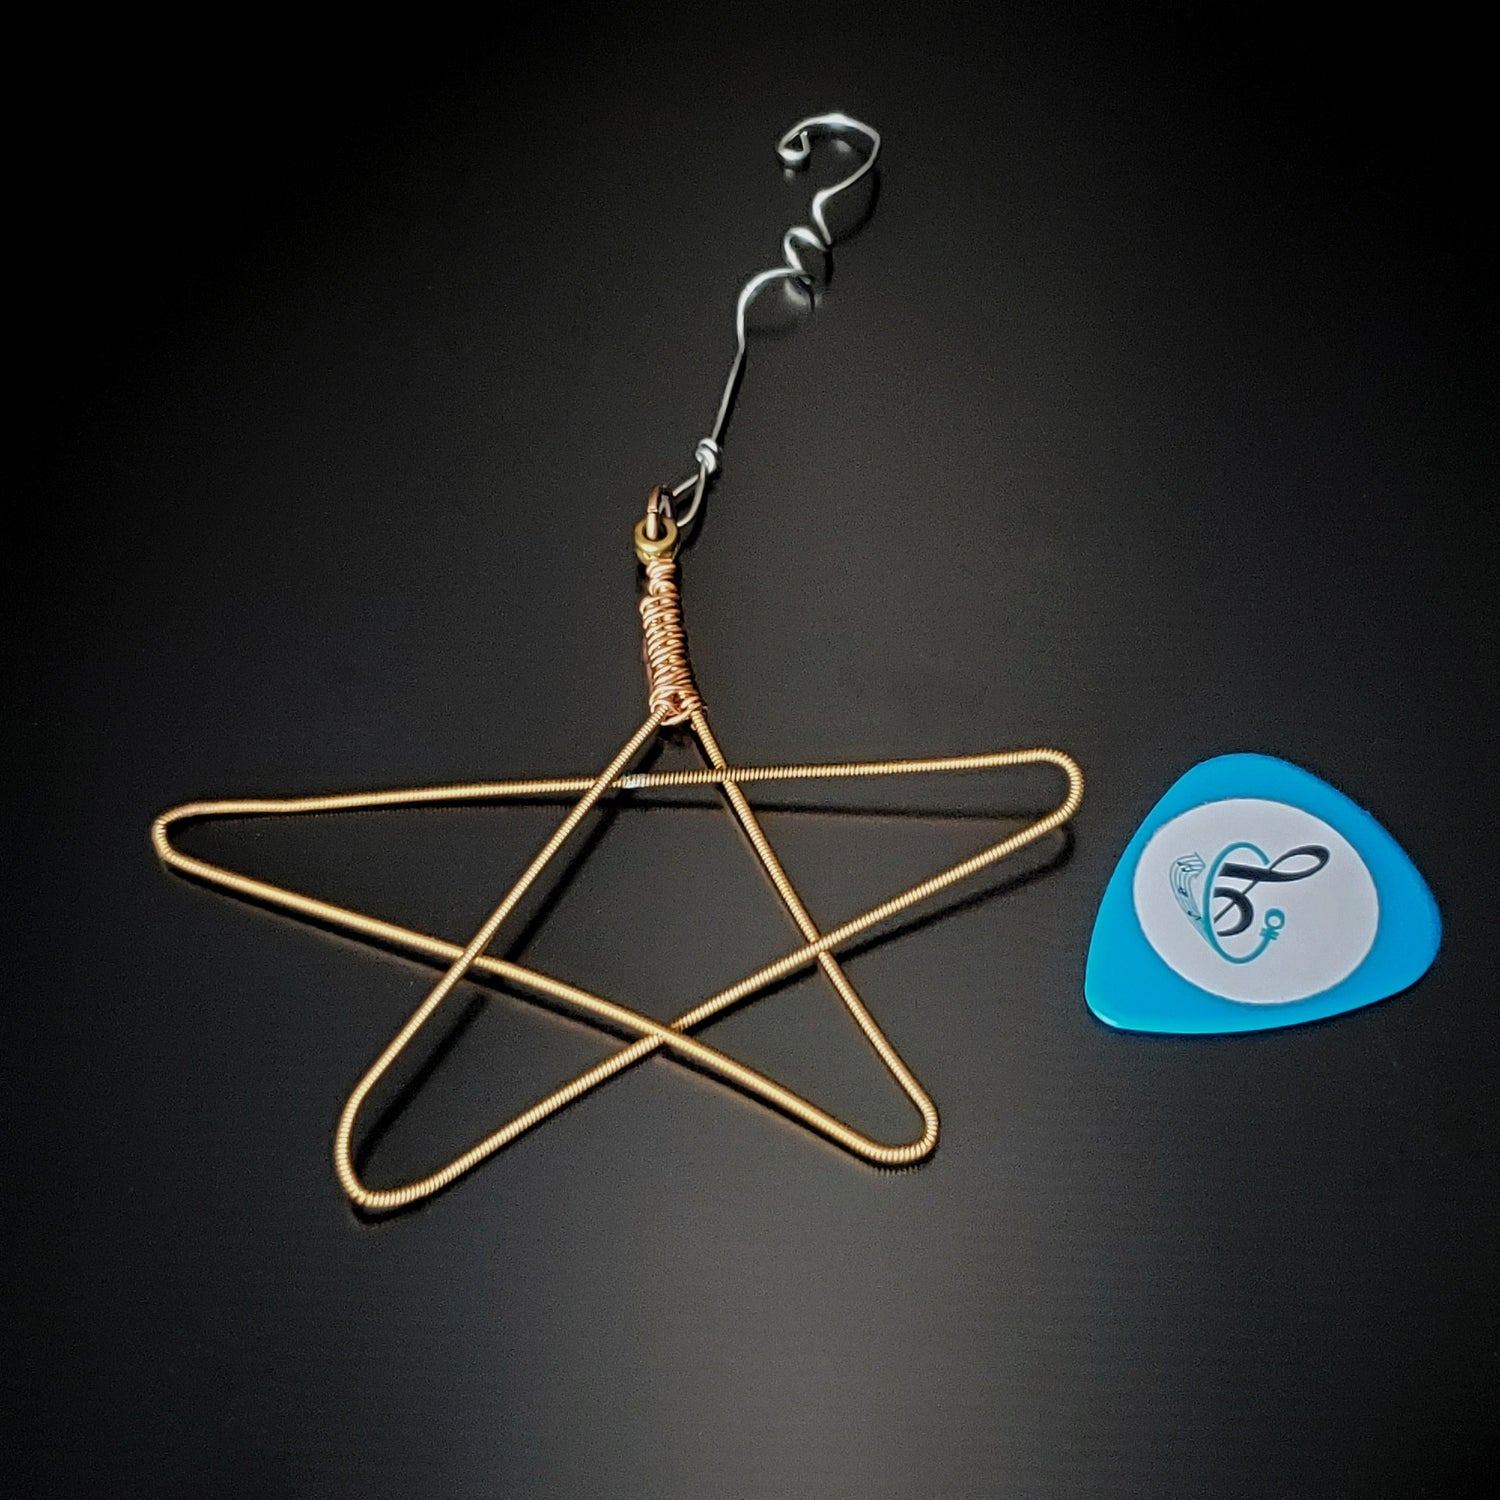 Christmas ornament in the shape of a star, made from an upcycled guitar string next to a guitar pick